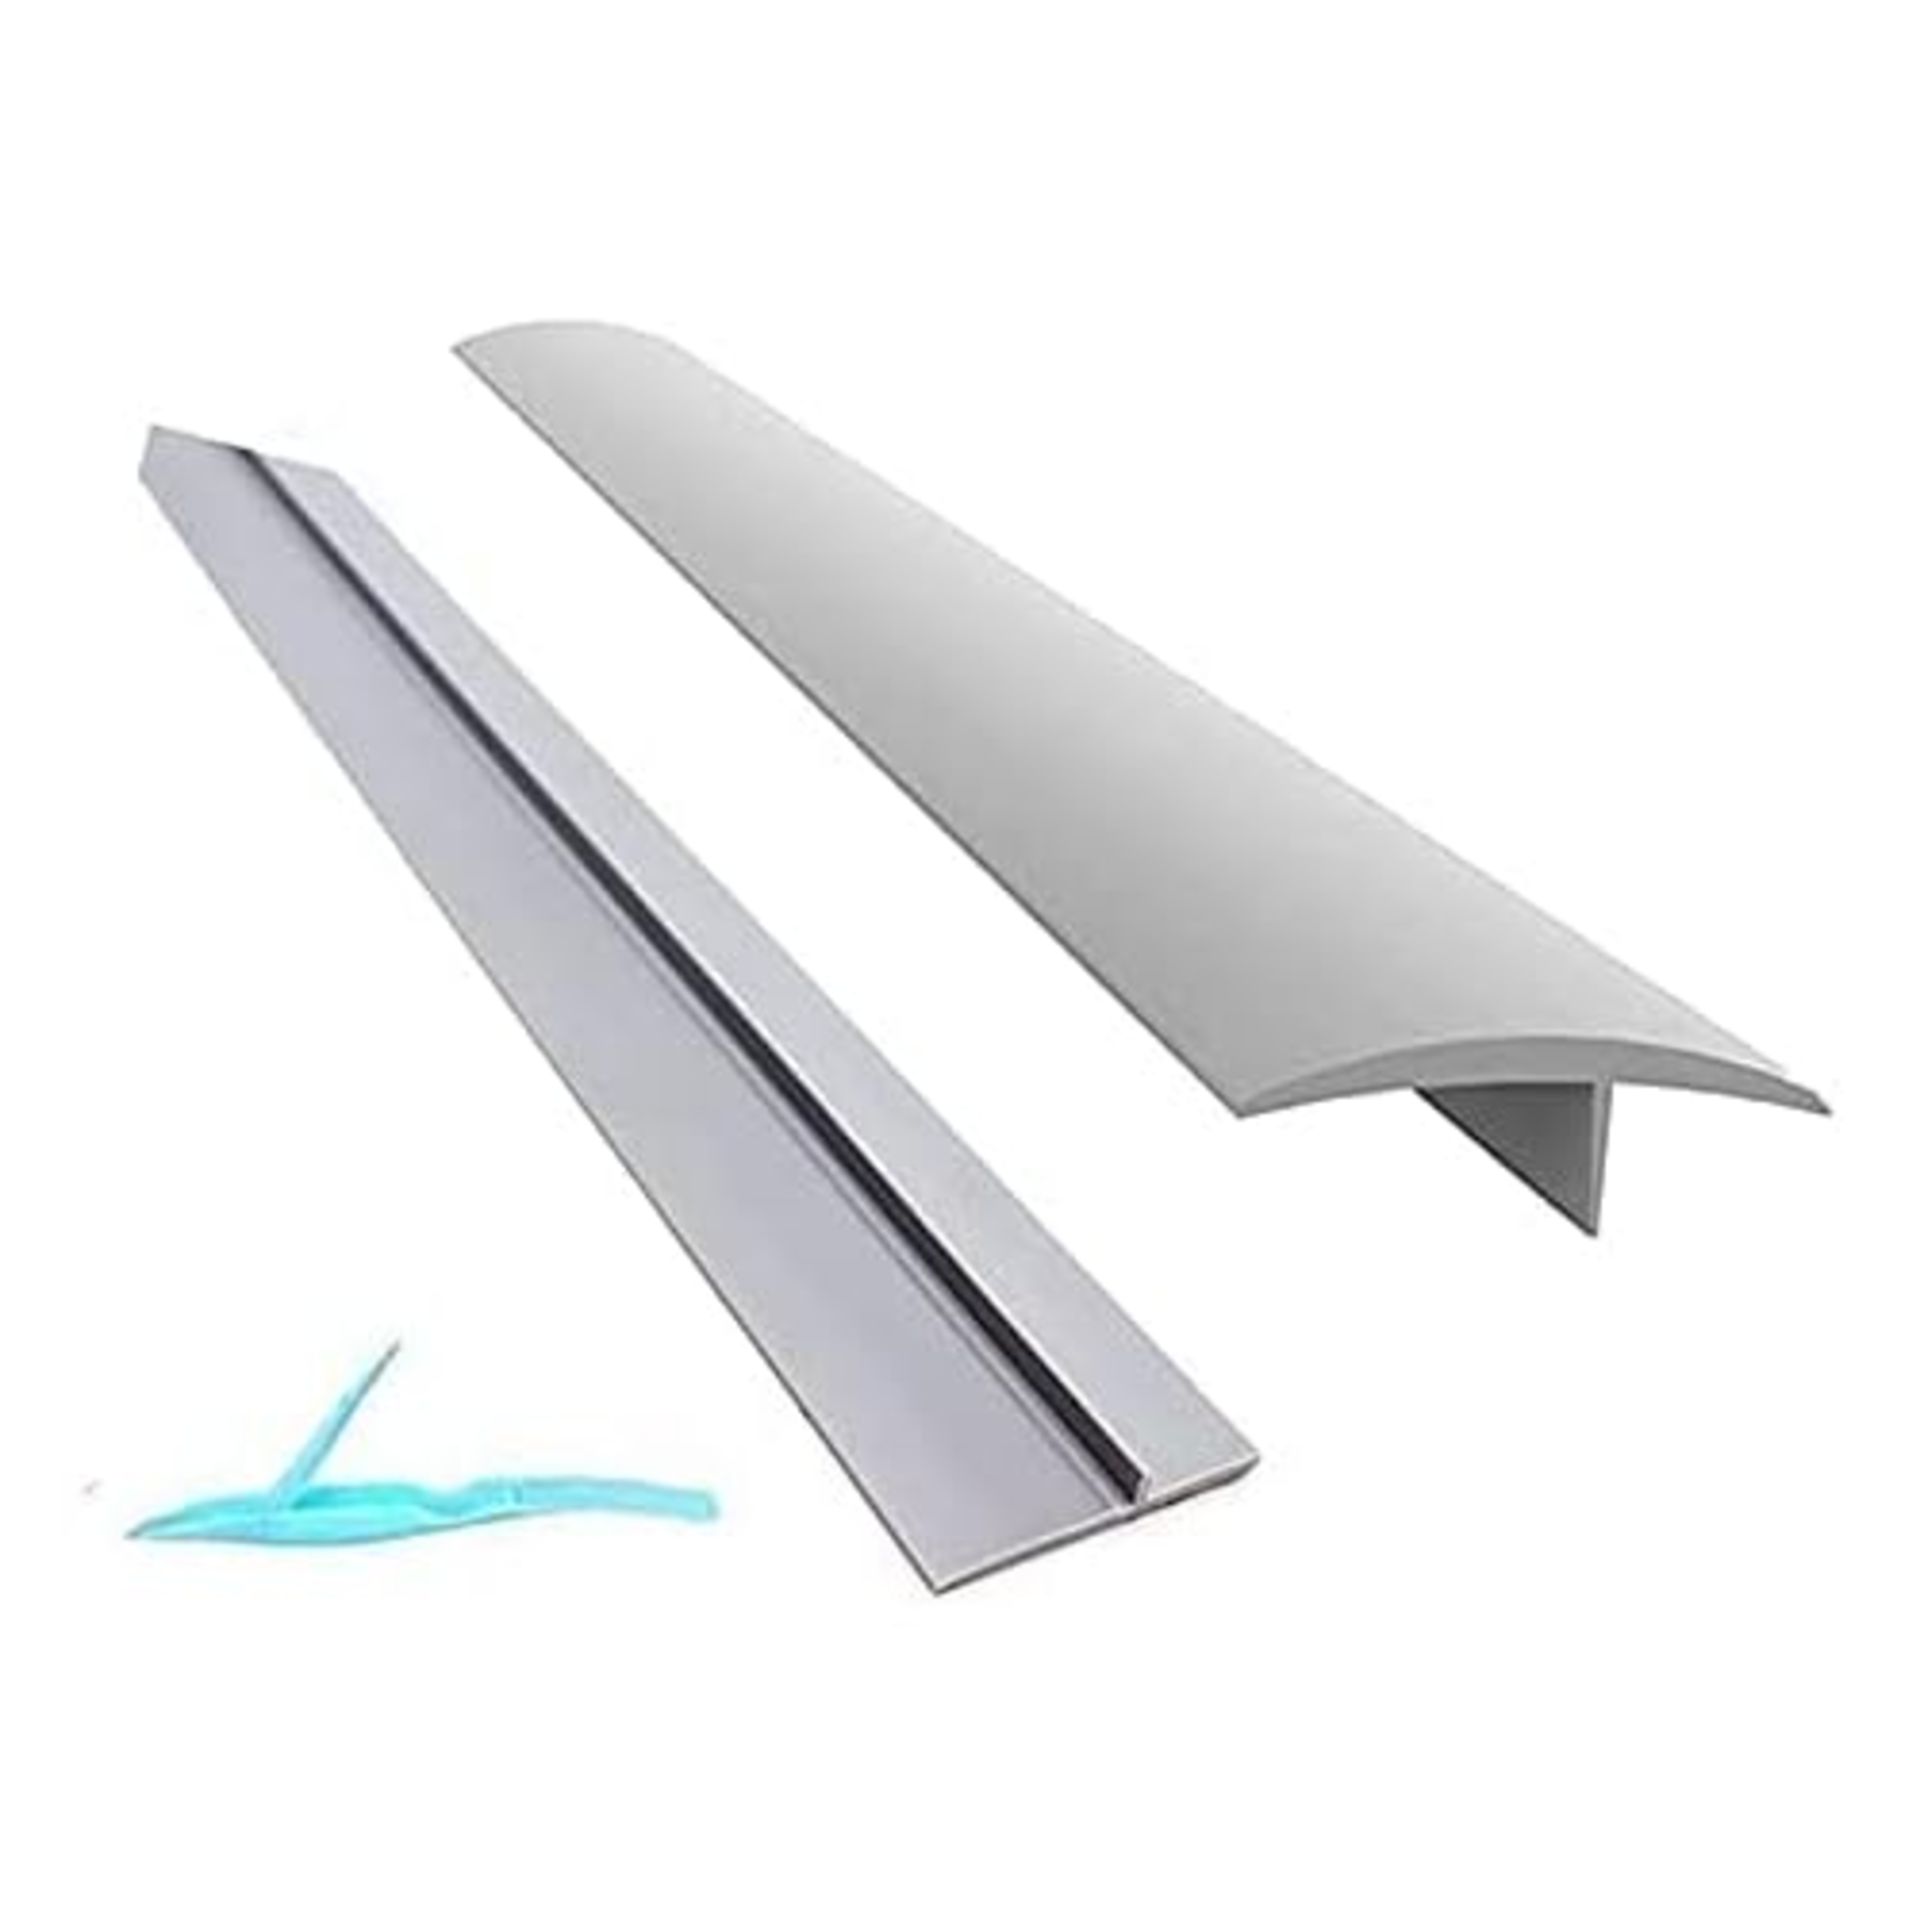 Lengthened 25'' Silicone Stove Counter Gap Cover, The Heat Resistant Oven Gap Filler Seals Gaps Bet